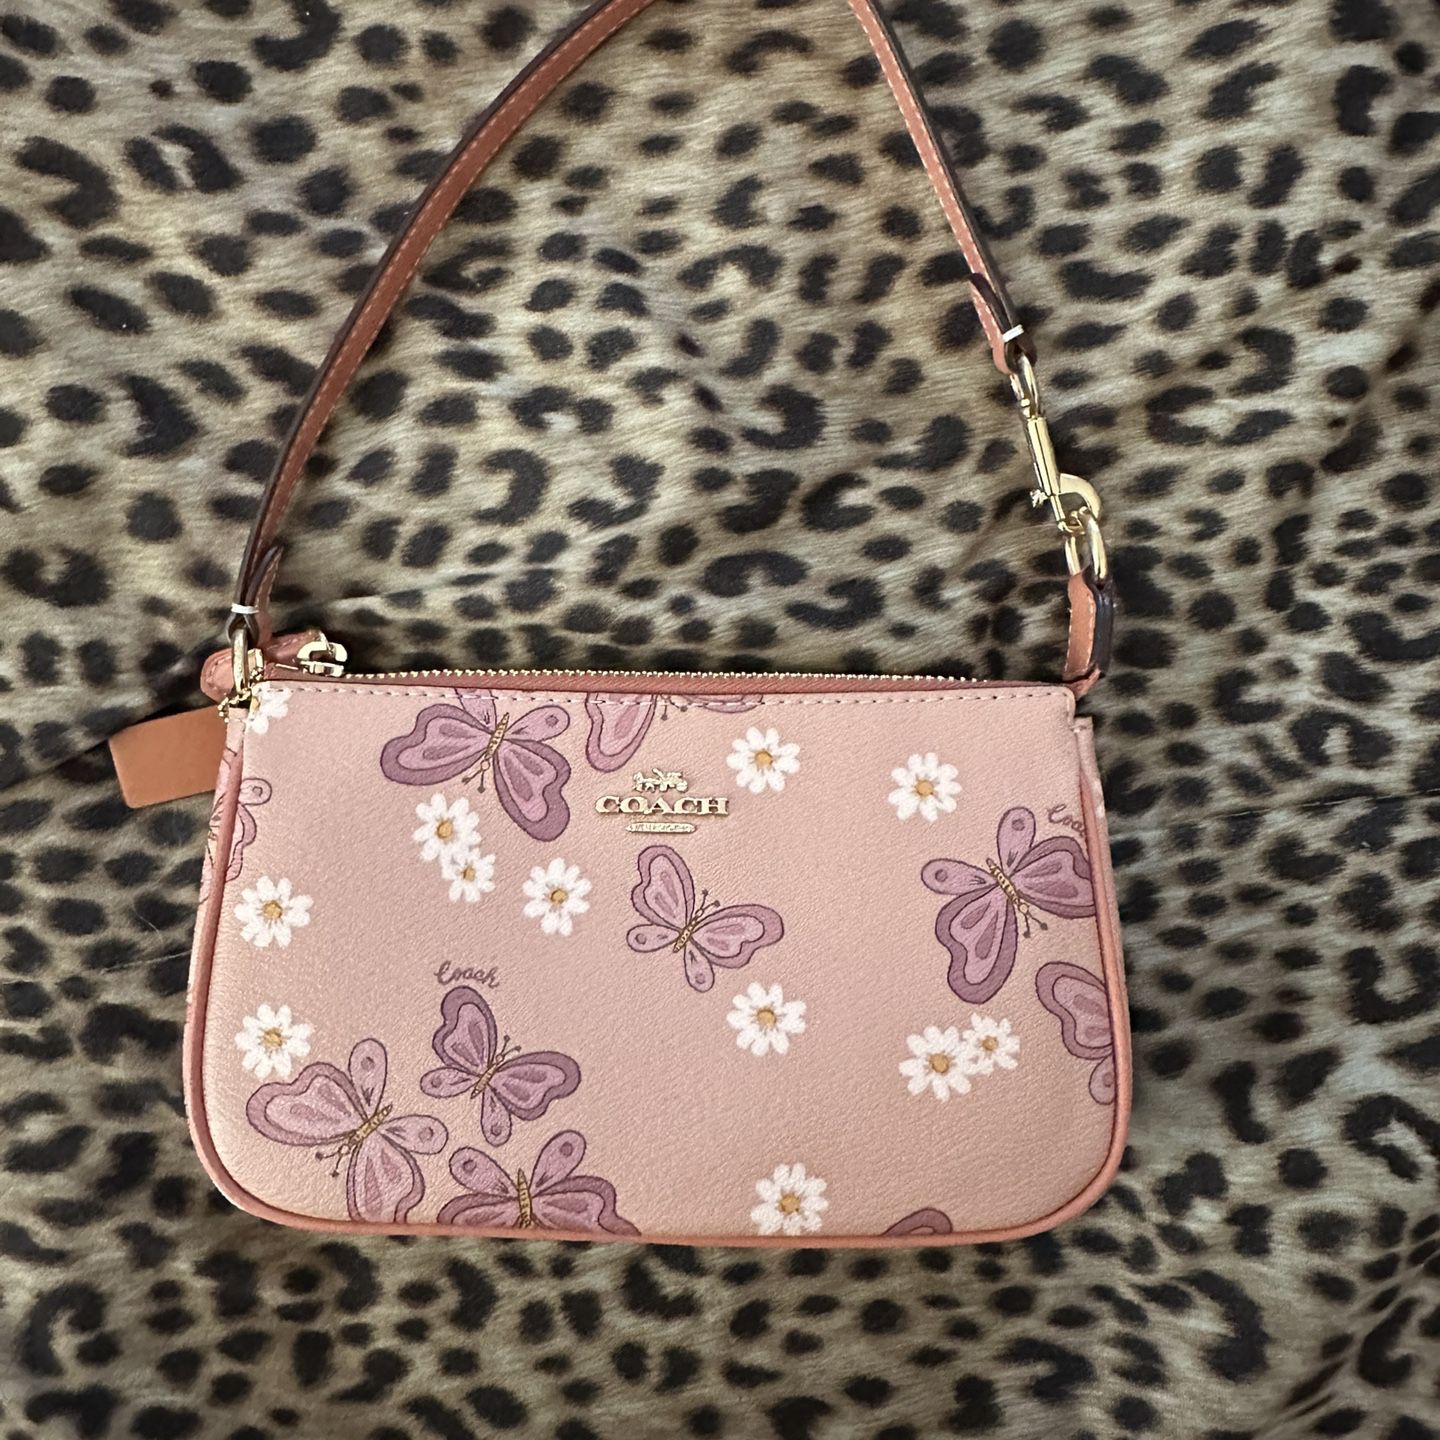 Mk / Coach Bags for Sale in Indio, CA - OfferUp